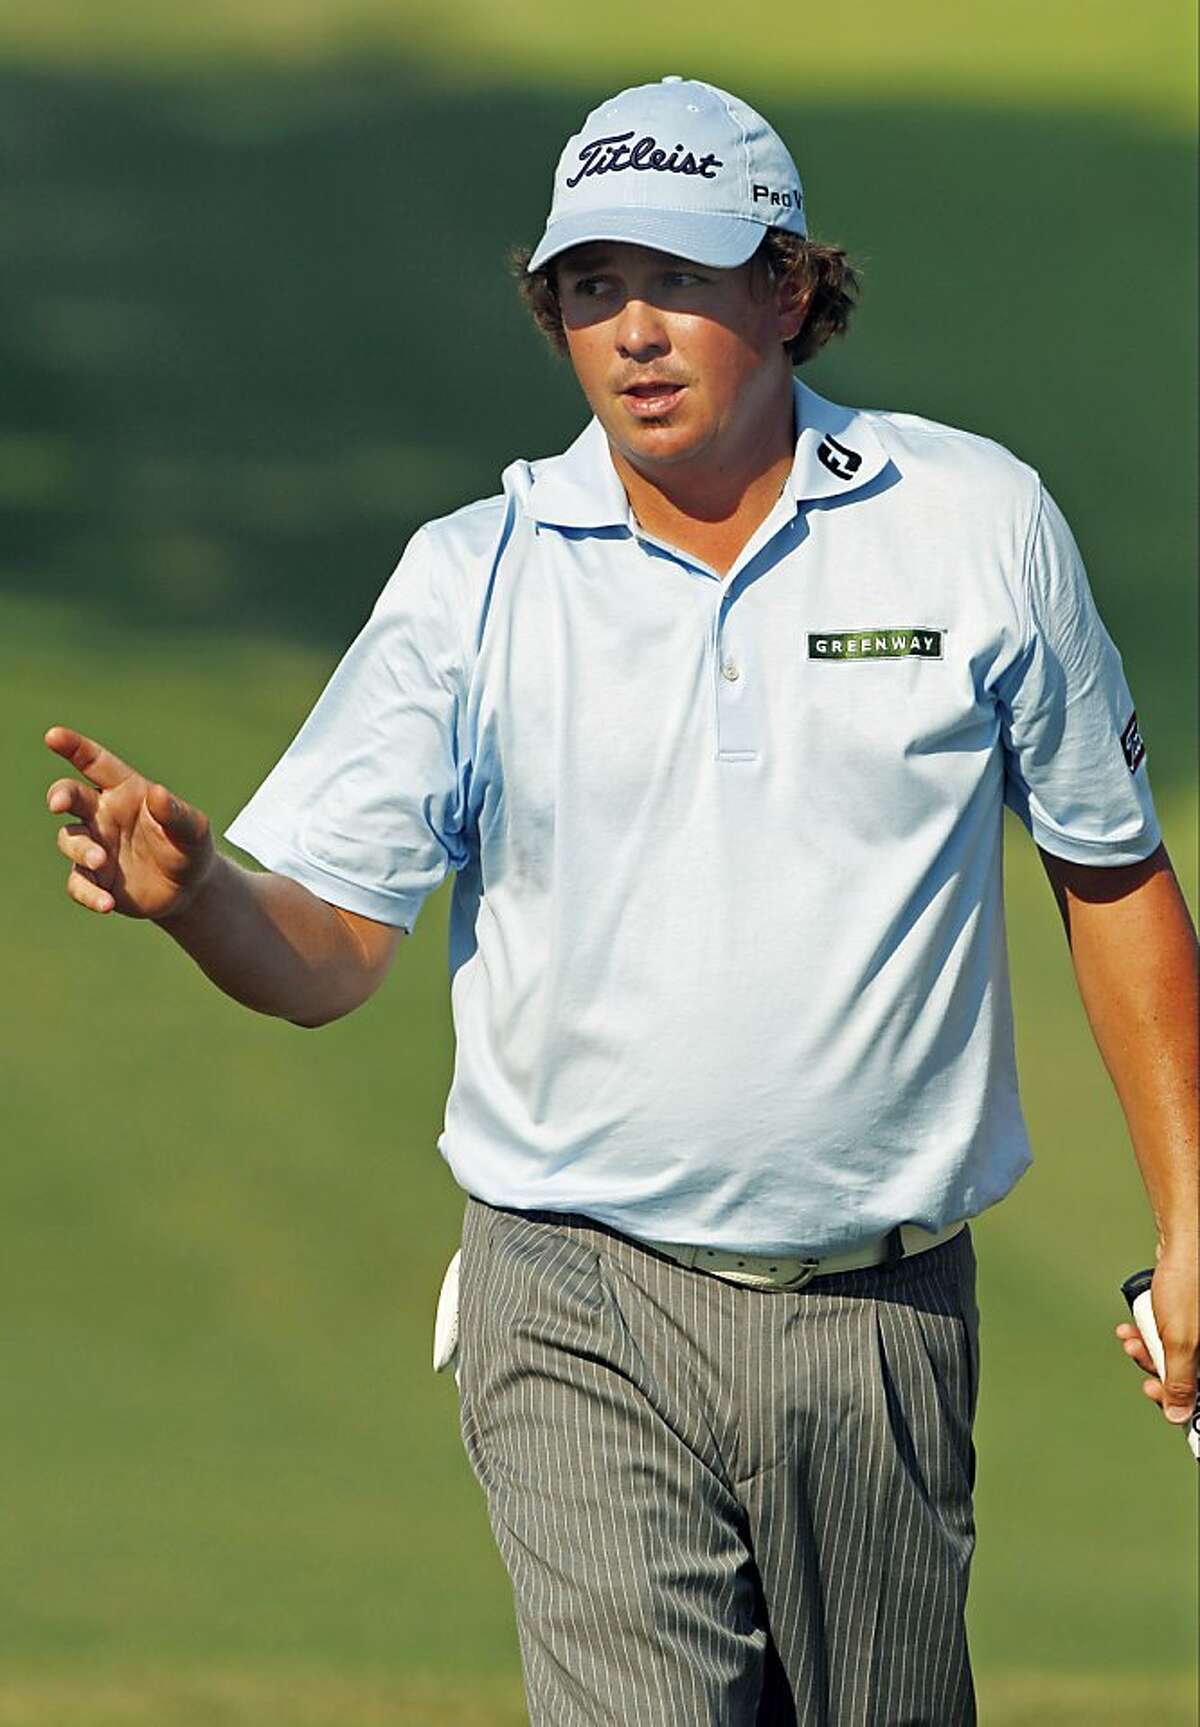 Jason Dufner reacts after making a birdie putt on the ninth hole during the second round of the PGA Championship golf tournament Friday, Aug. 12, 2011, at the Atlanta Athletic Club in Johns Creek, Ga. (AP Photo/Charlie Krupa)